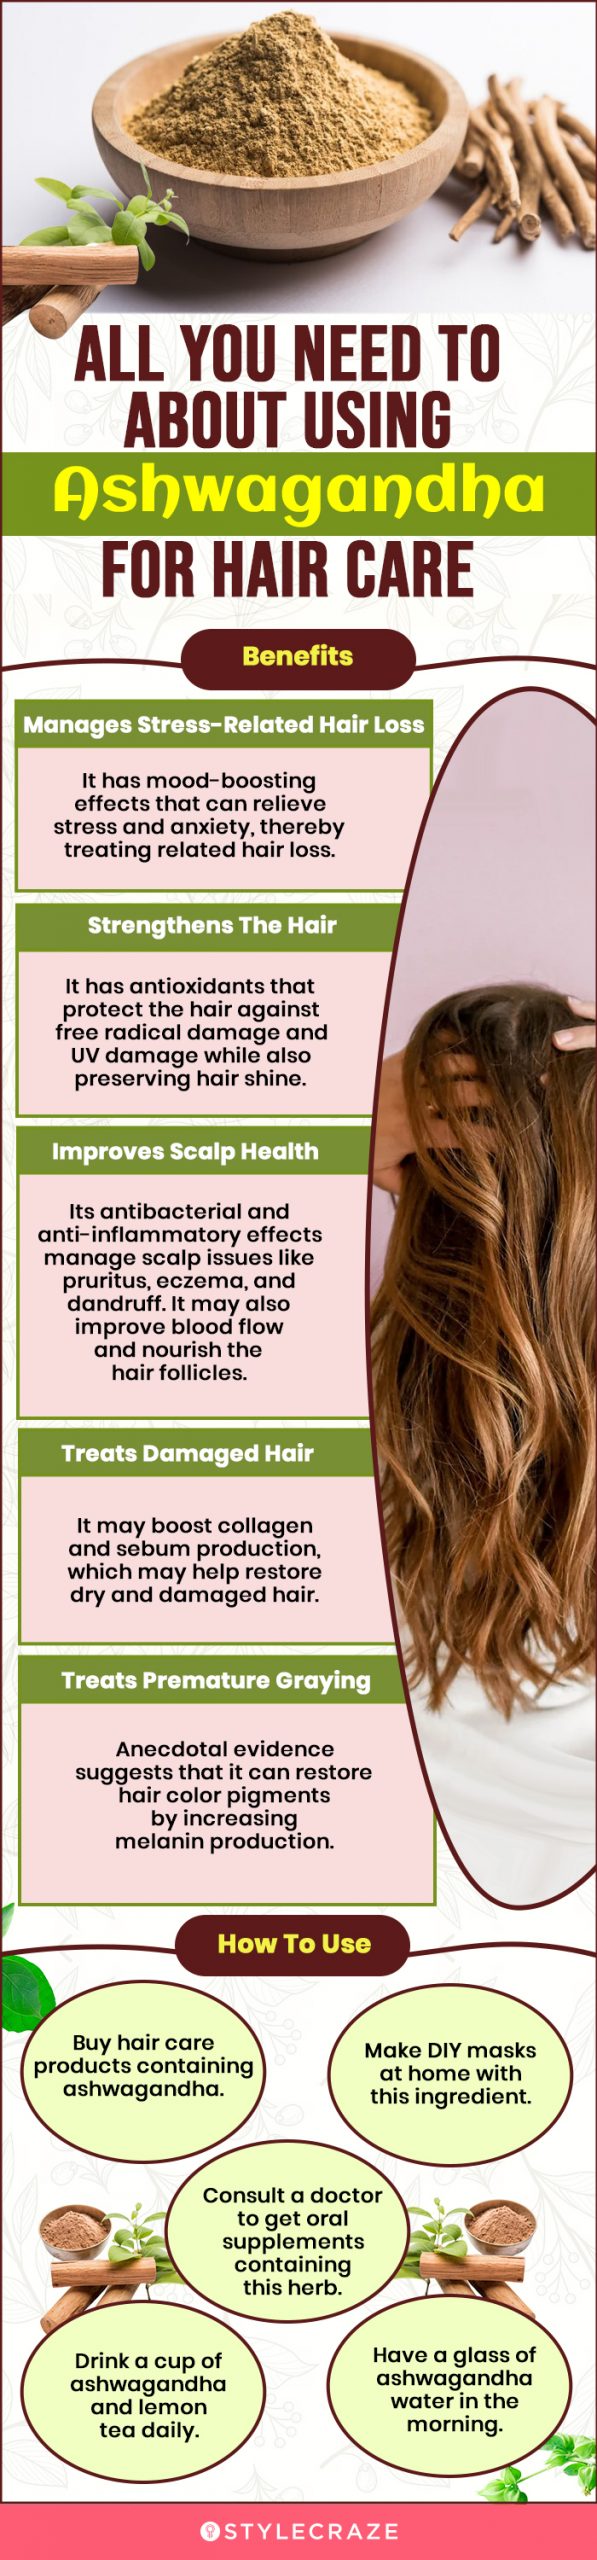 all you need to about using ashwagandha for hair care (infographic)